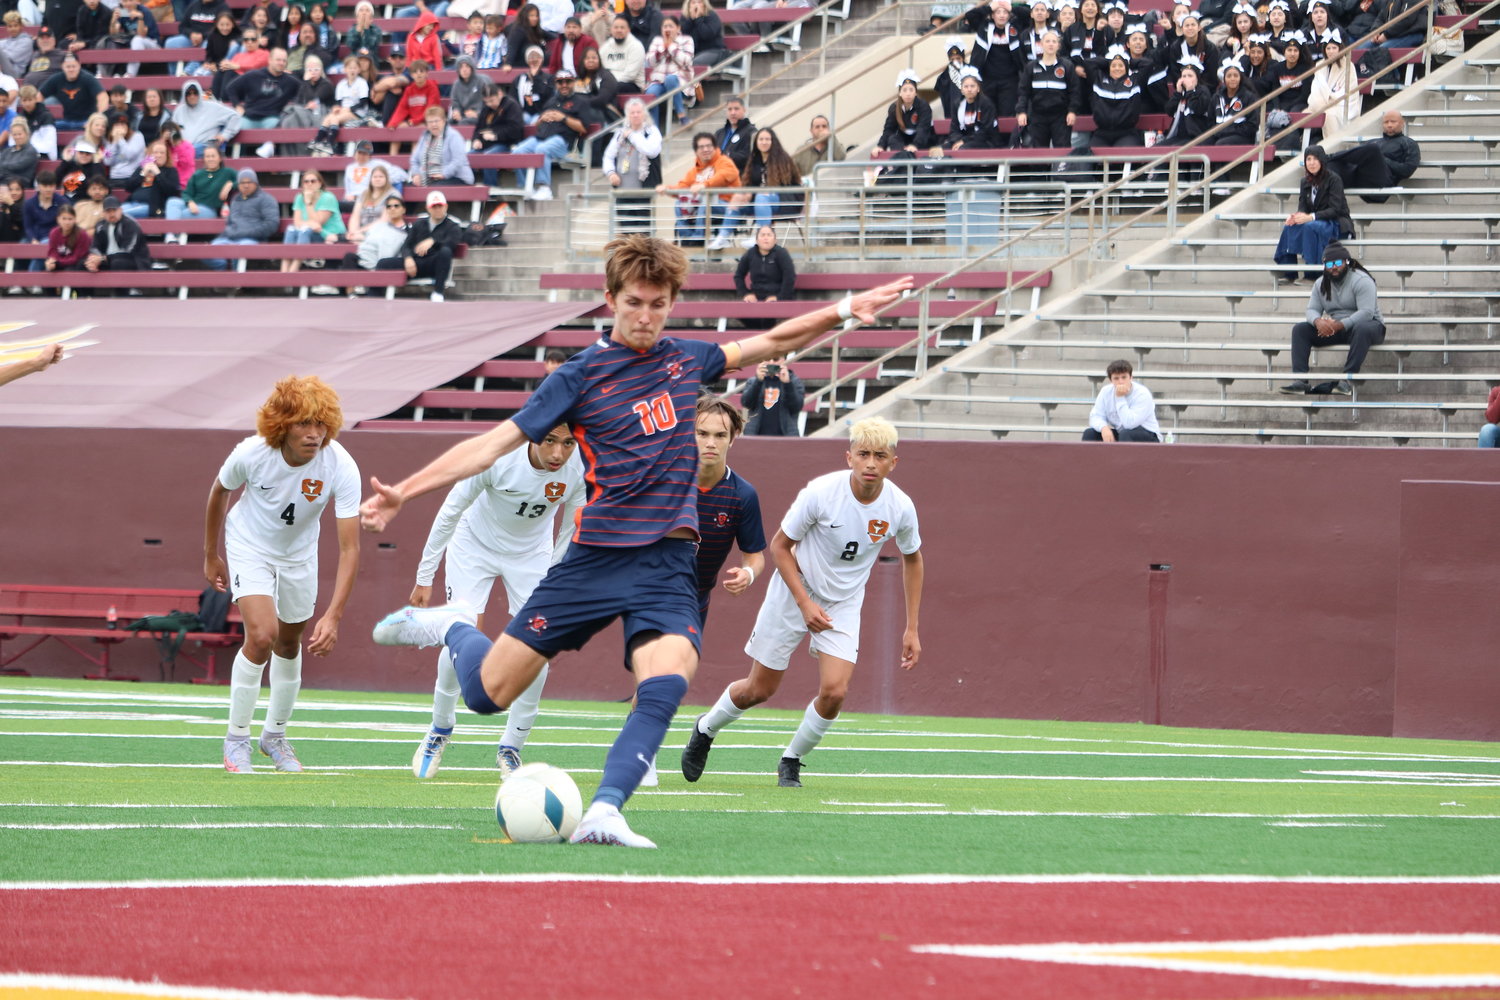 Aidan Morrison takes a penalty during Saturday's Region III Class 6A Final between Seven Lakes and Dobie at Abshier Stadium in Deer Park.